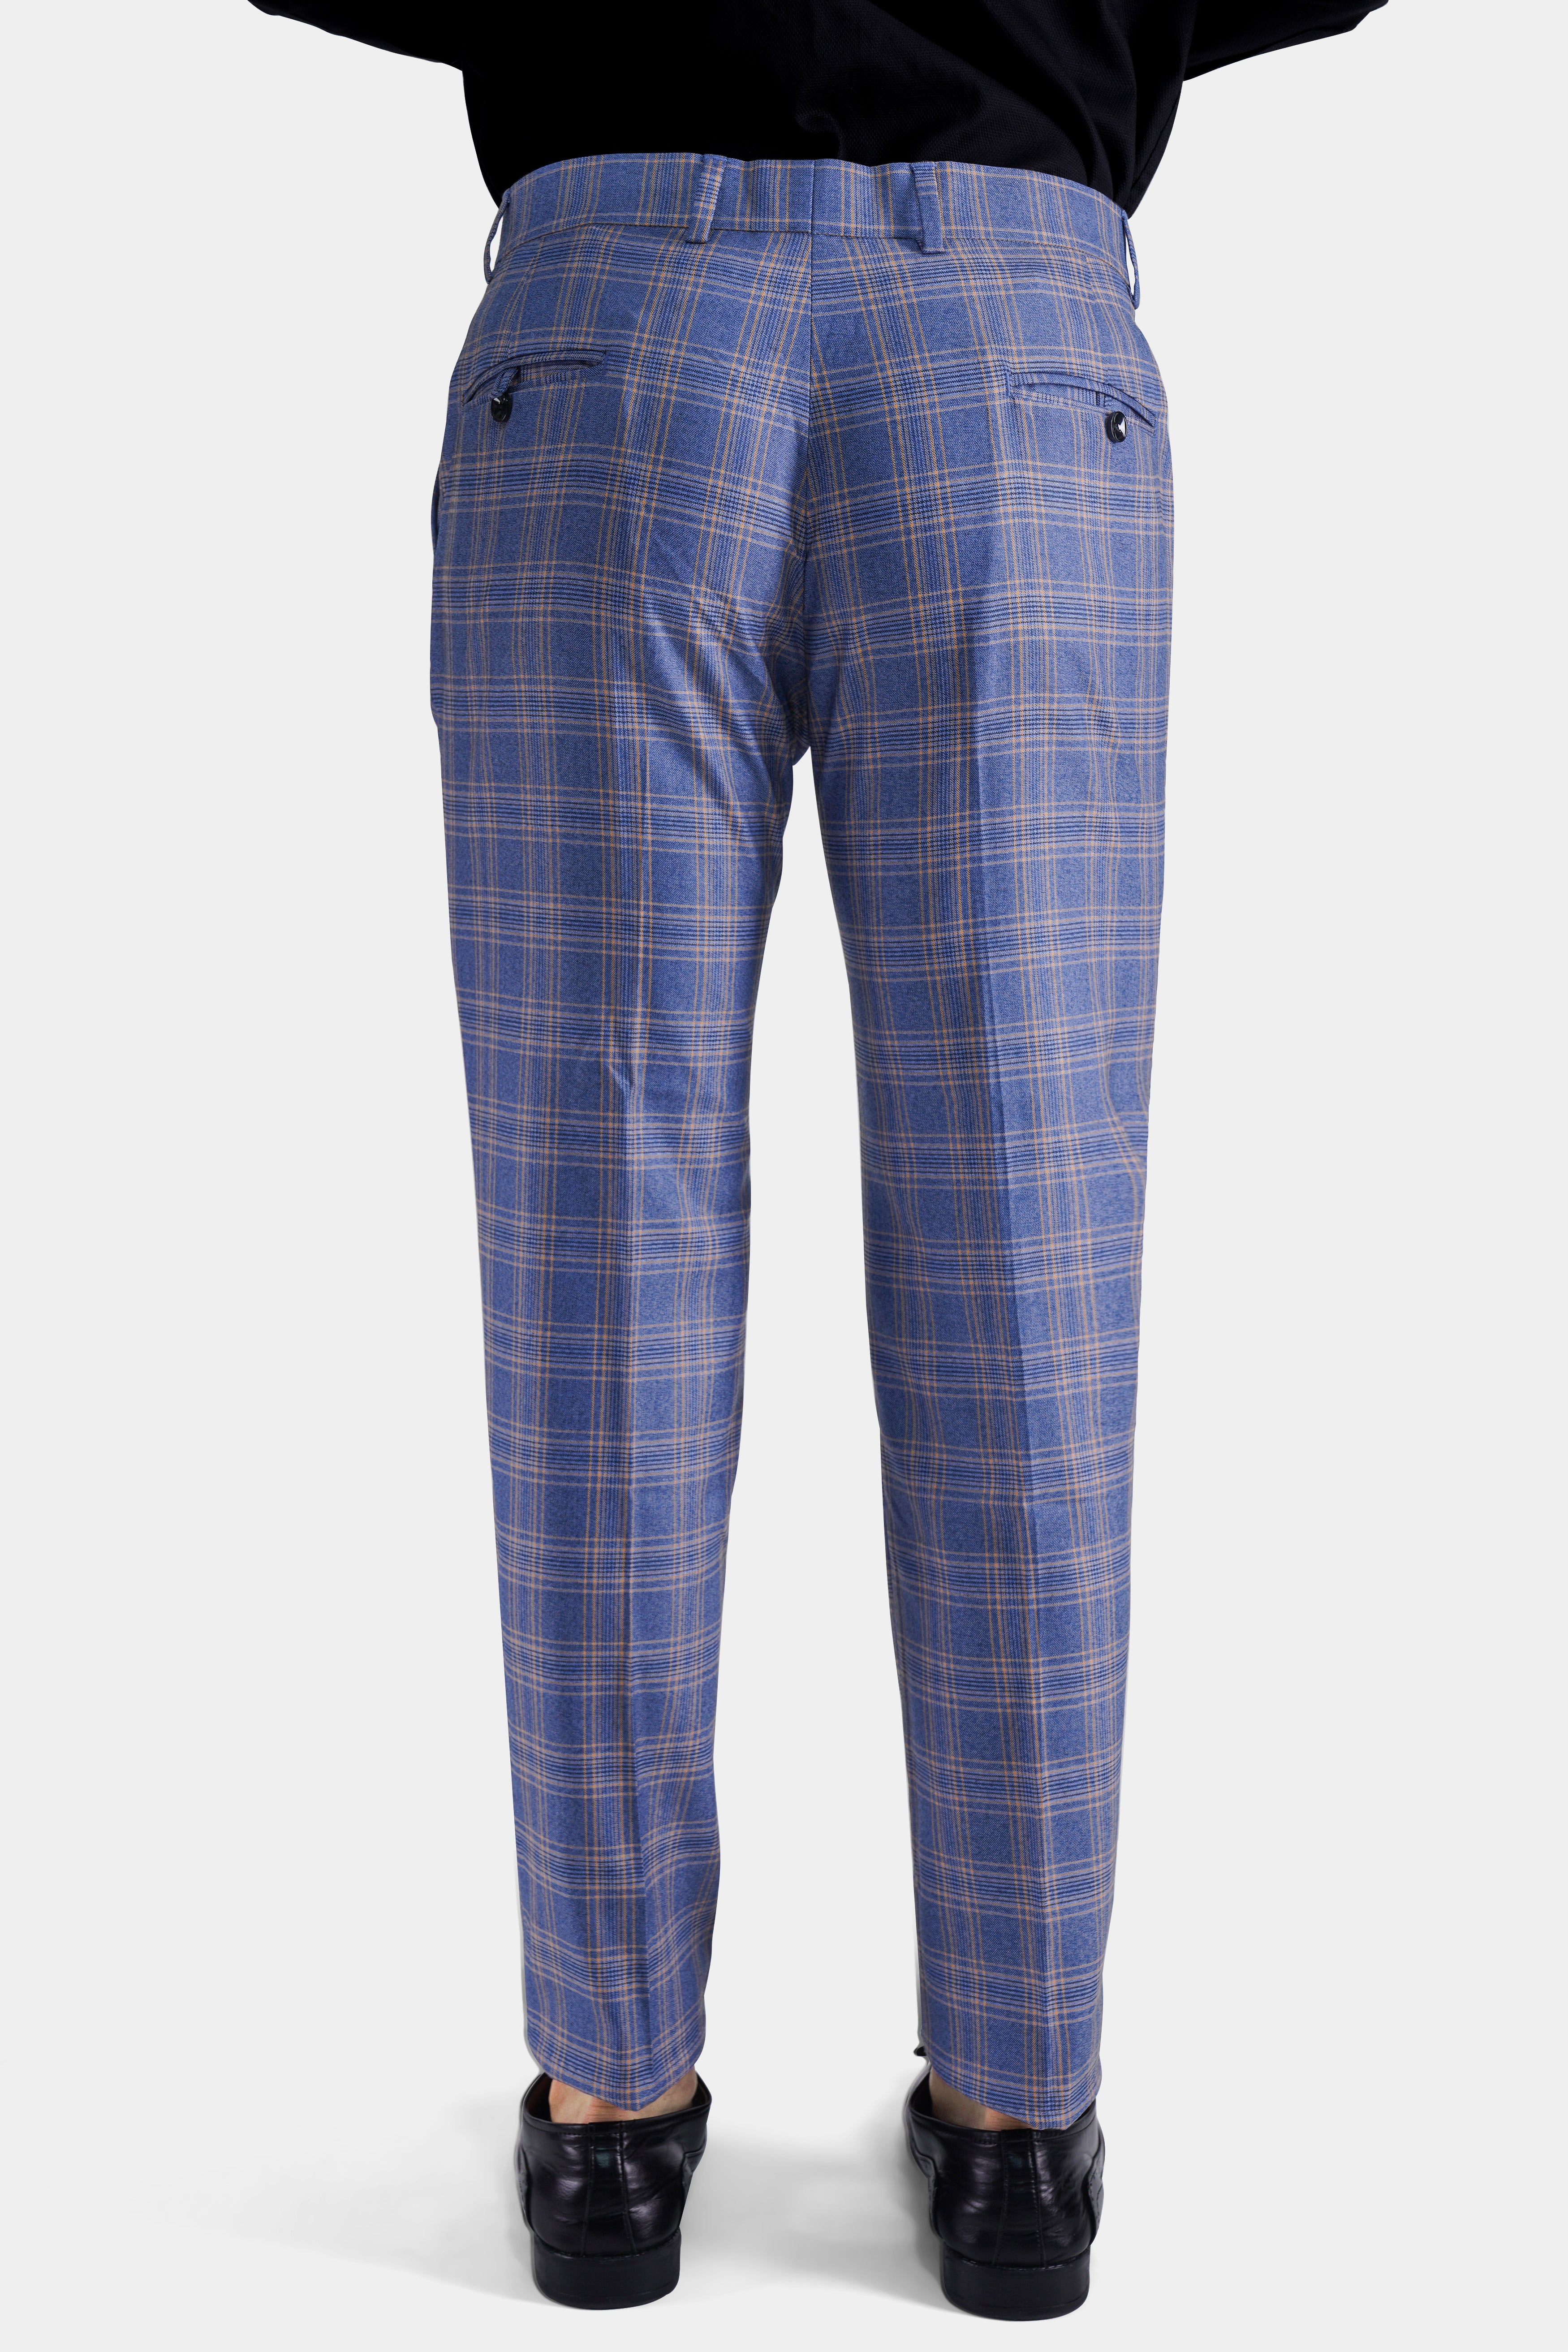 Scampi Blue and Muesli Brown Plaid Wool Rich Cross Buttoned Bandhgala Suit ST2771-CBG2-36,ST2771-CBG2-38,ST2771-CBG2-40,ST2771-CBG2-42,ST2771-CBG2-44,ST2771-CBG2-46,ST2771-CBG2-48,ST2771-CBG2-50,ST2771-CBG2-52,ST2771-CBG2-54,ST2771-CBG2-56,ST2771-CBG2-58,ST2771-CBG2-60